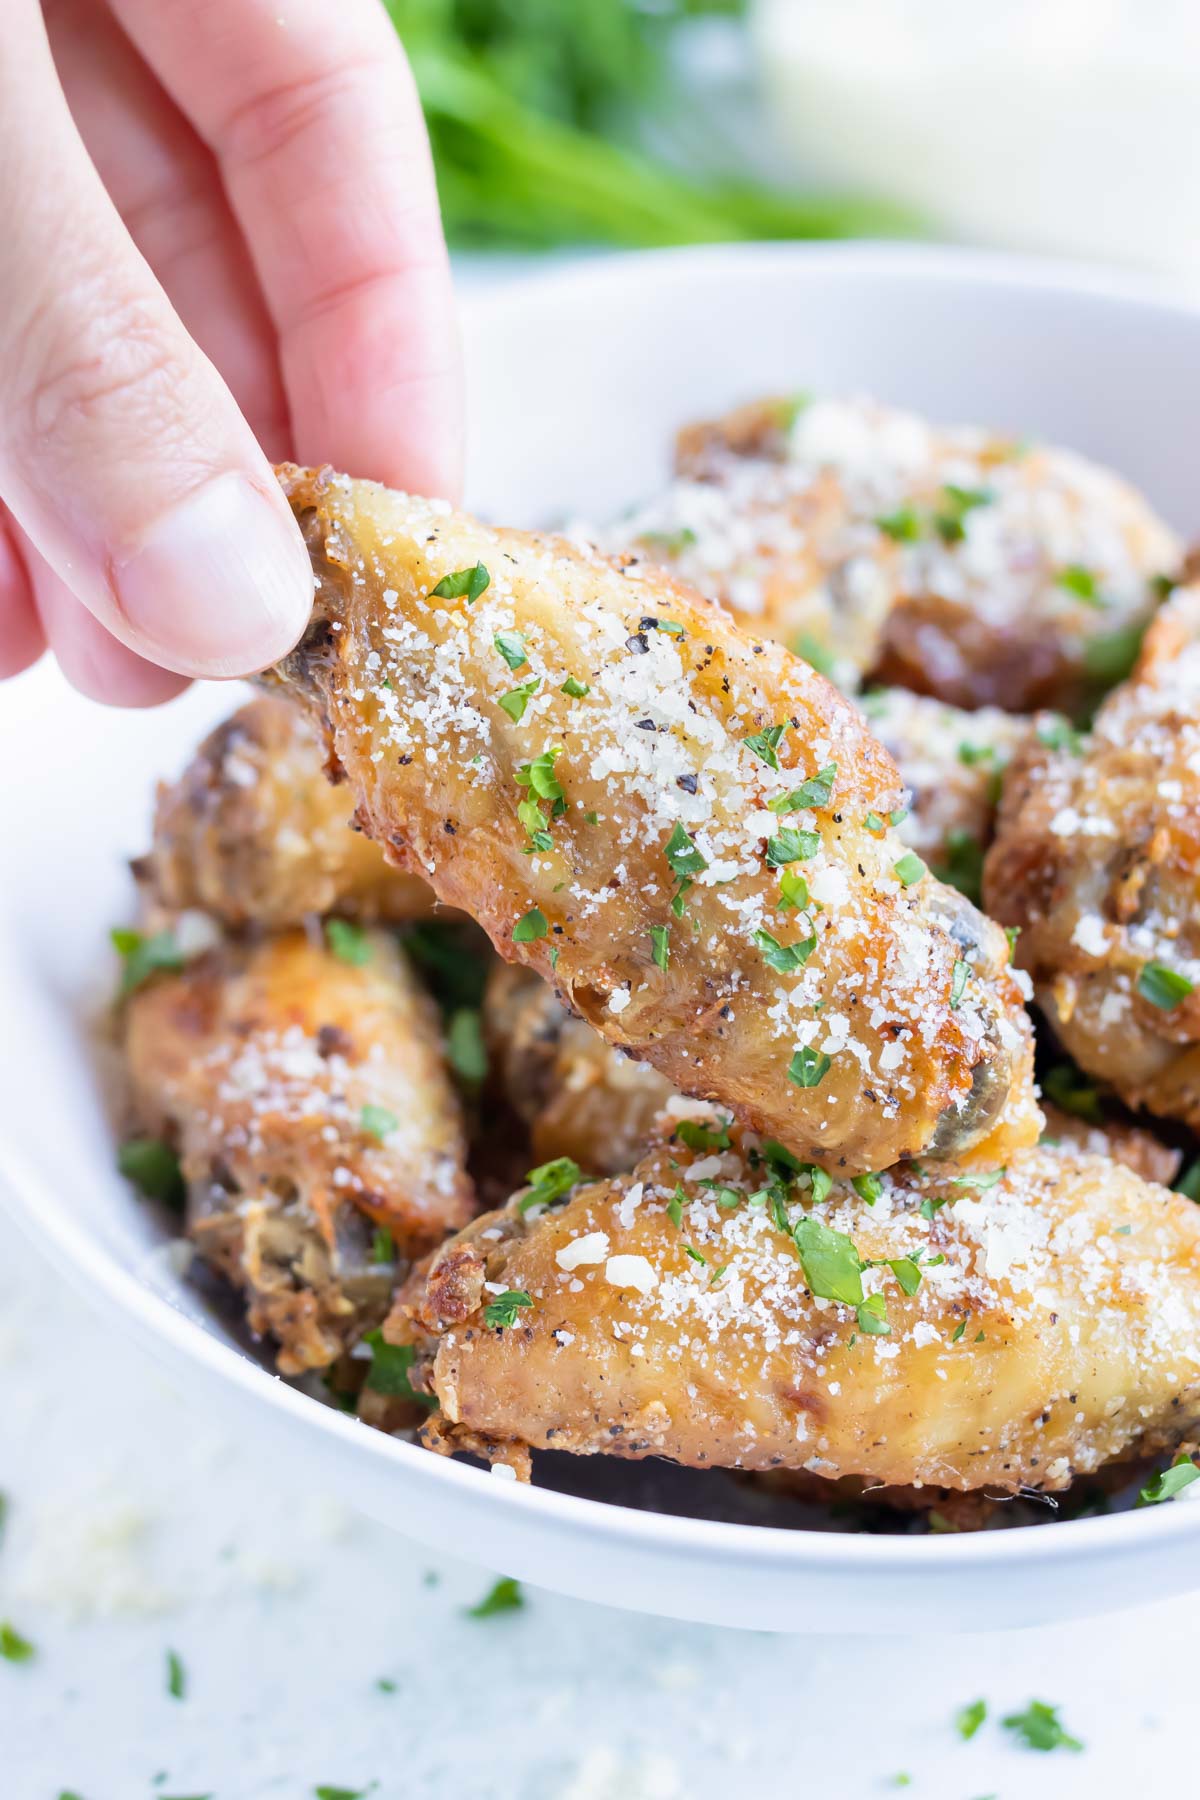 Garlic air fryer chicken wings are lifted up out of a white bowl.